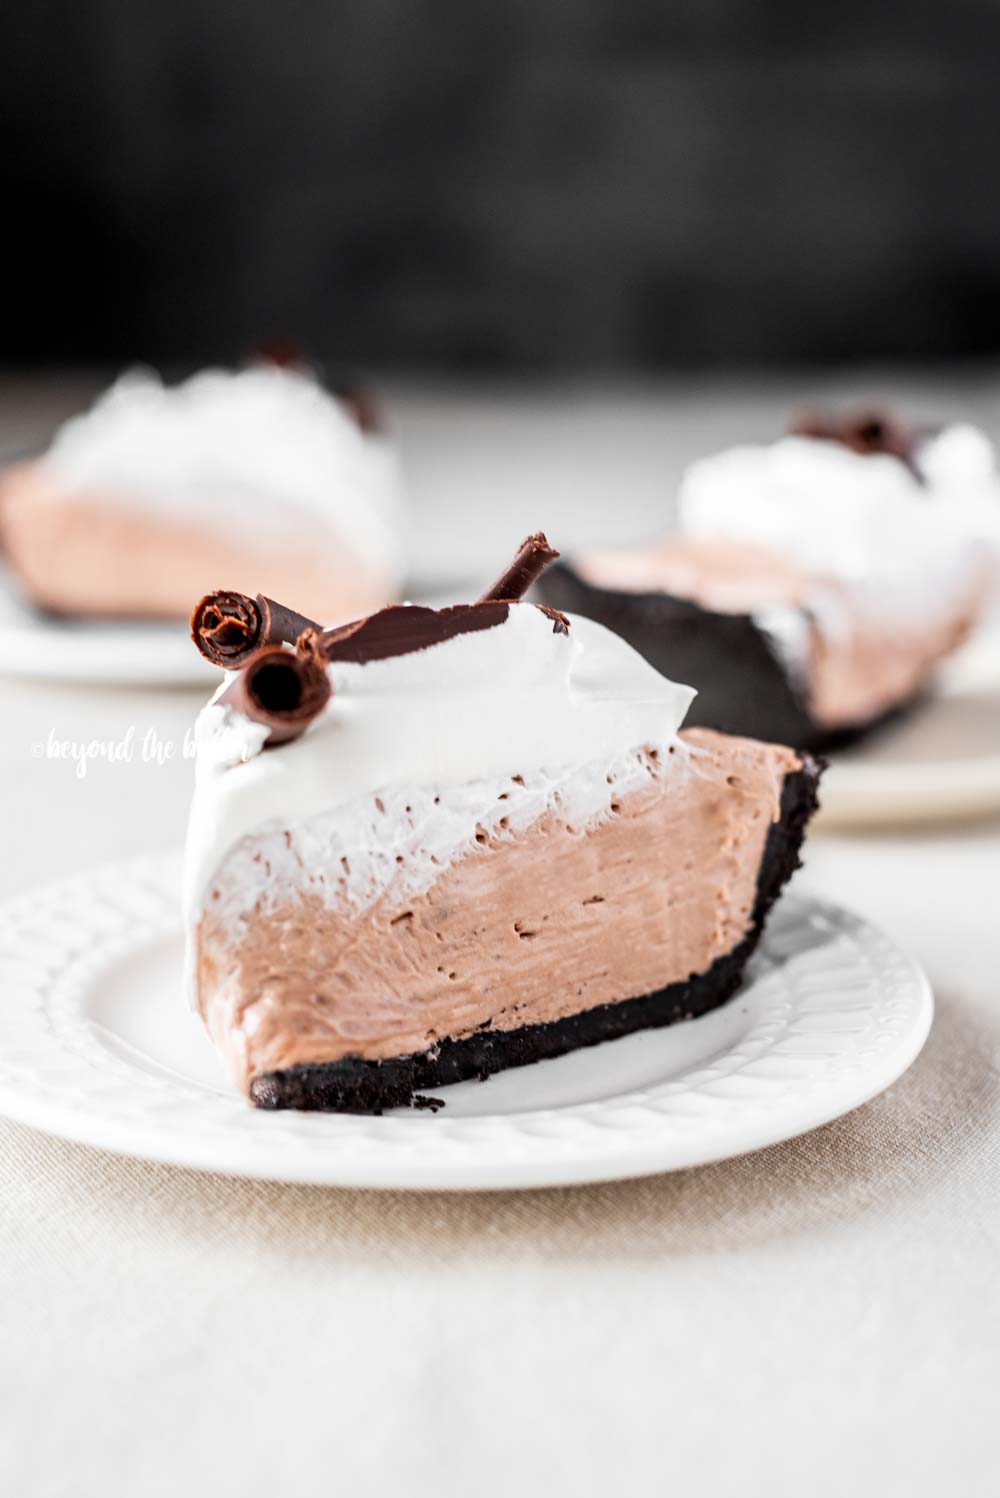 Slice of no-bake chocolate cream pie with chocolate wafer crust on dessert plates | All Images © Beyond the Butter™